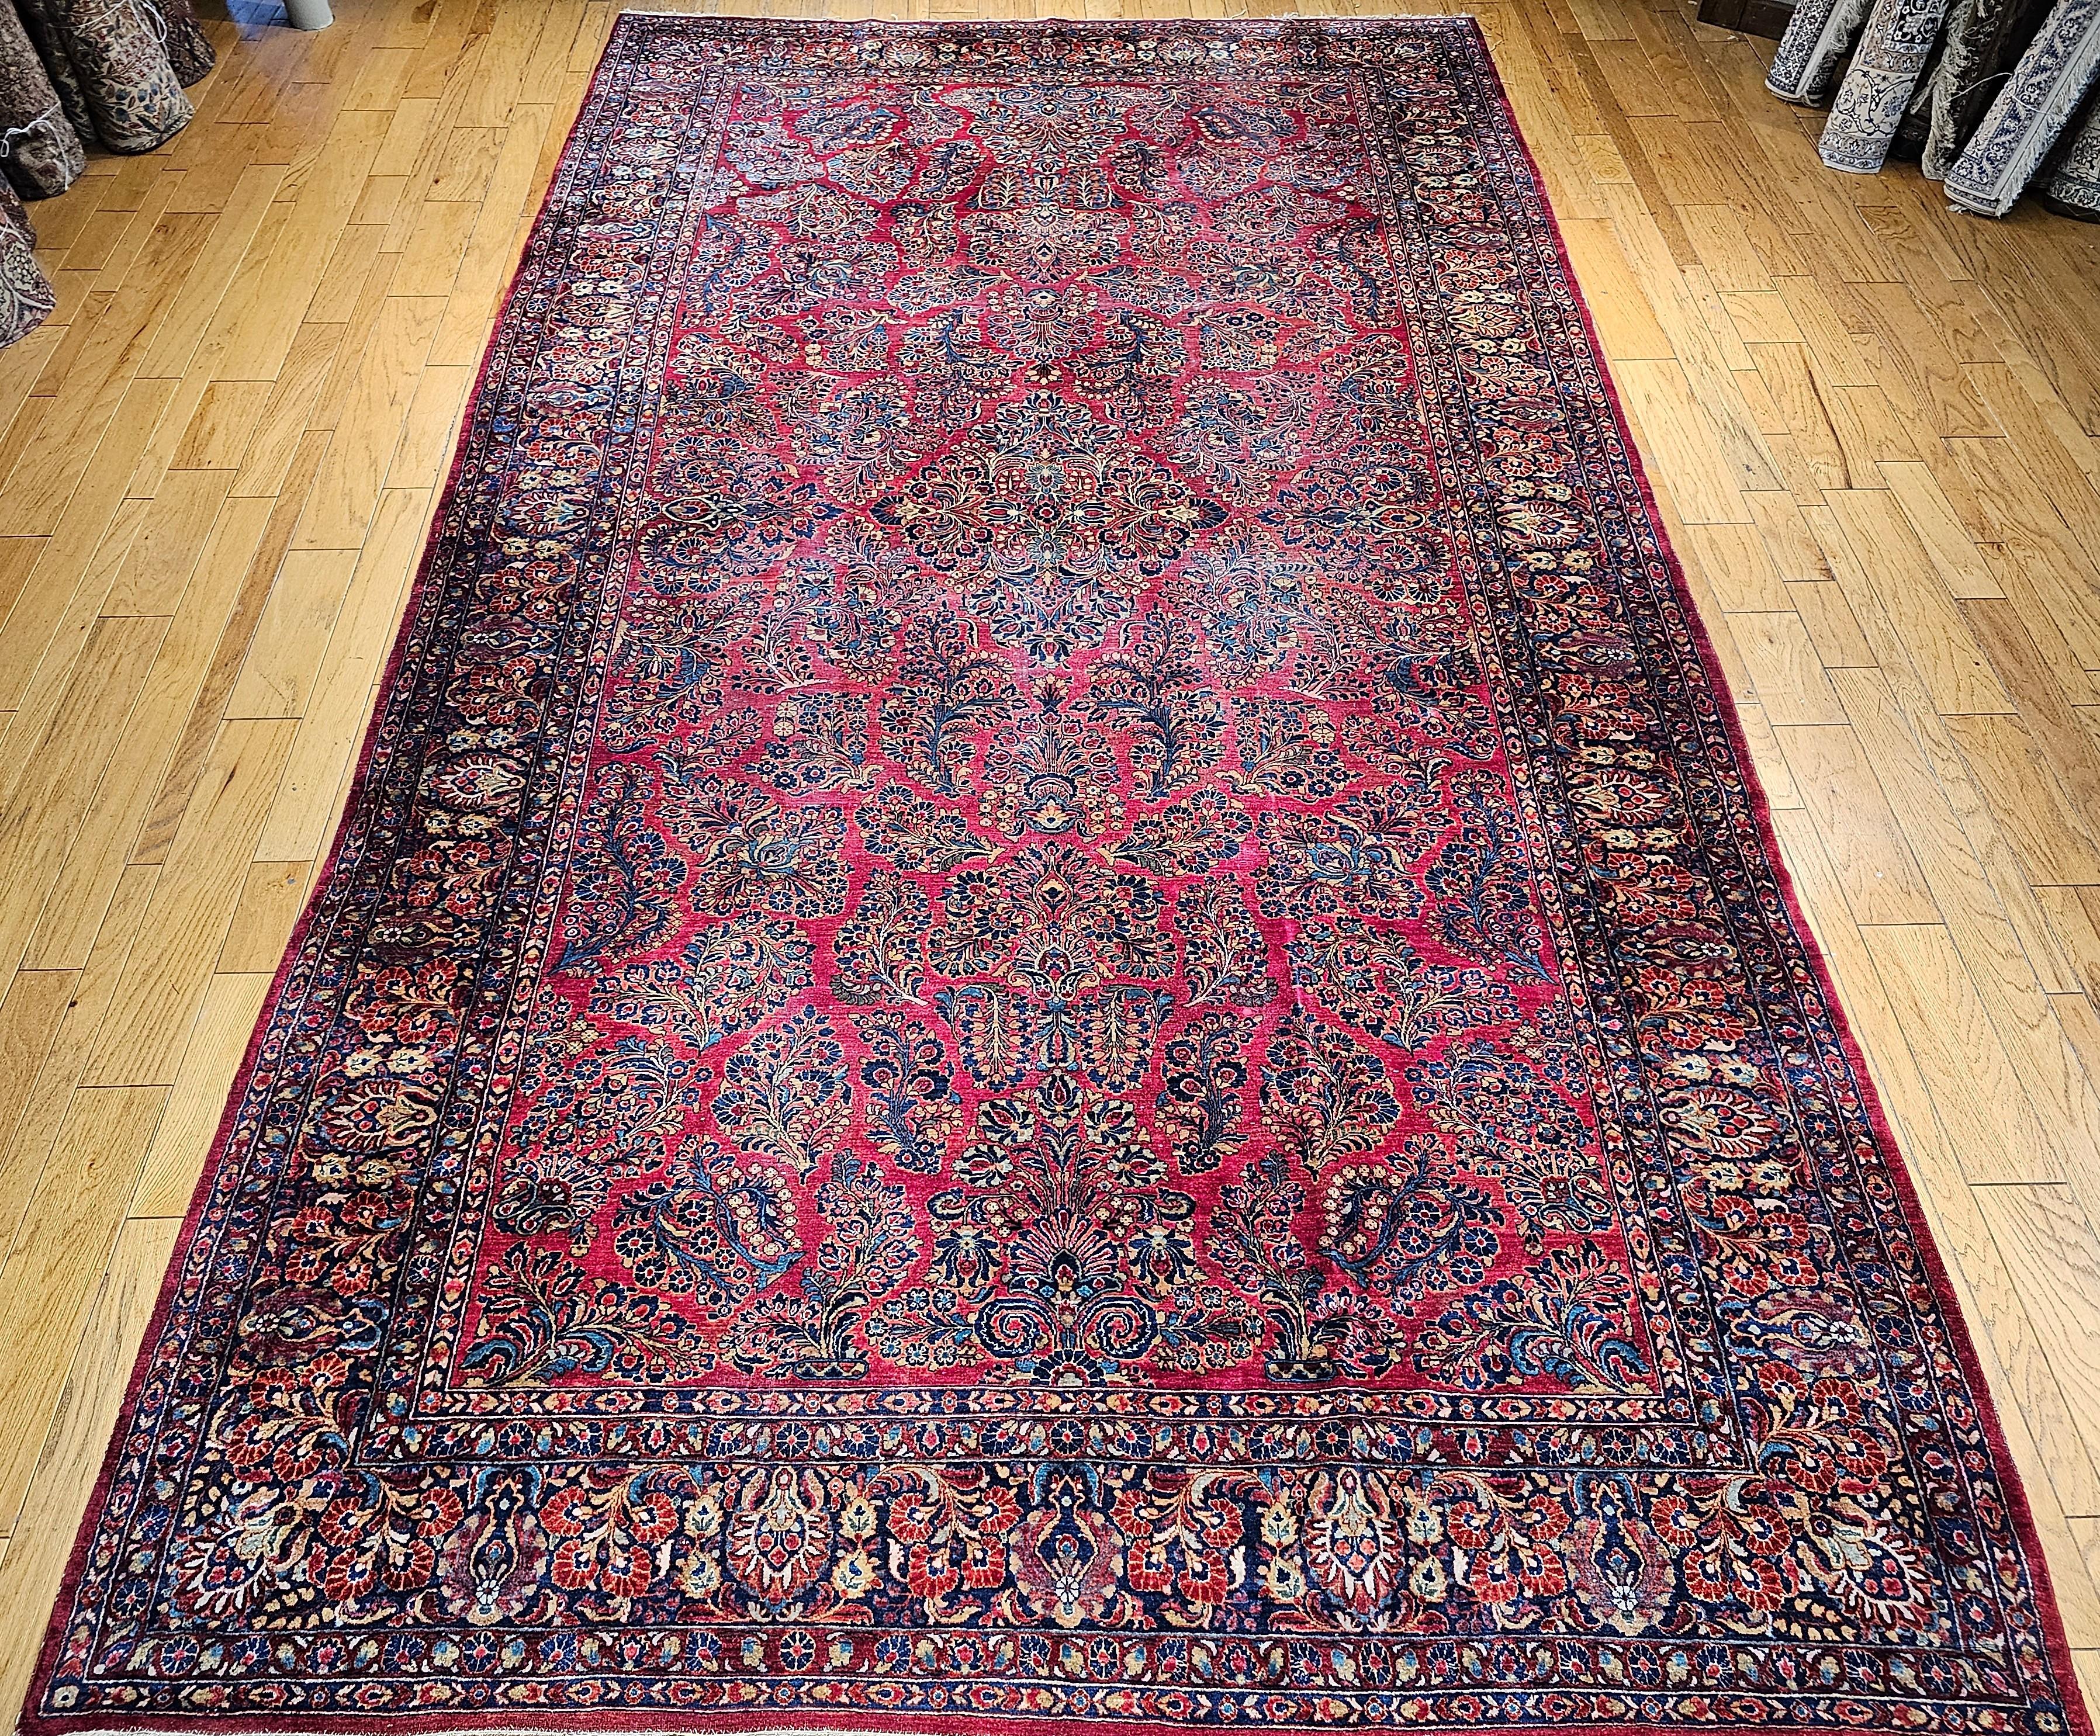 Vintage Oversized Persian  “Painted Sarouk”  in an all-over pattern consisting of large flower bouquets set on a bright red background with a navy blue border also filled with flower bouquets.  The color of bright red which is often referred to as